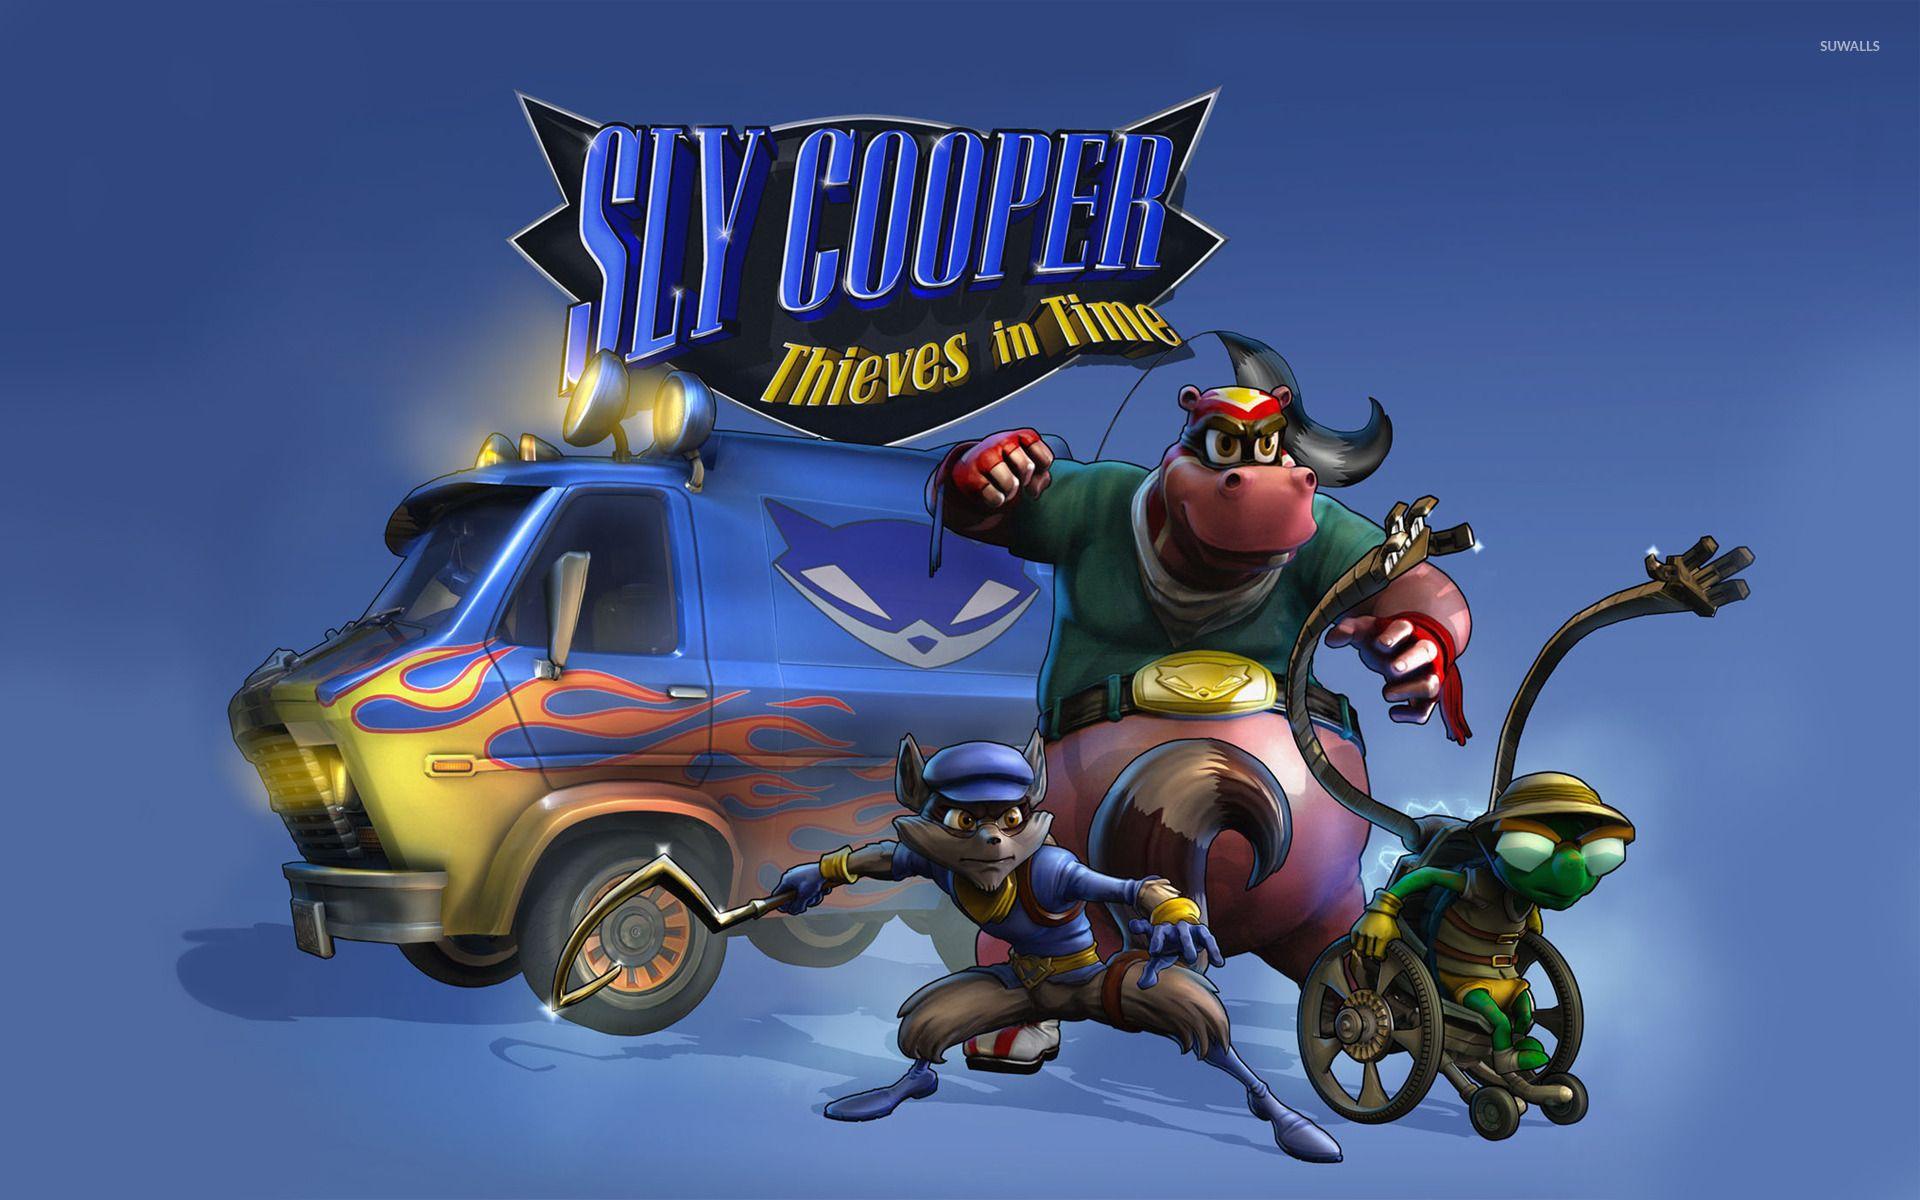 Sly Cooper: Thieves in Time [4] wallpaper wallpaper